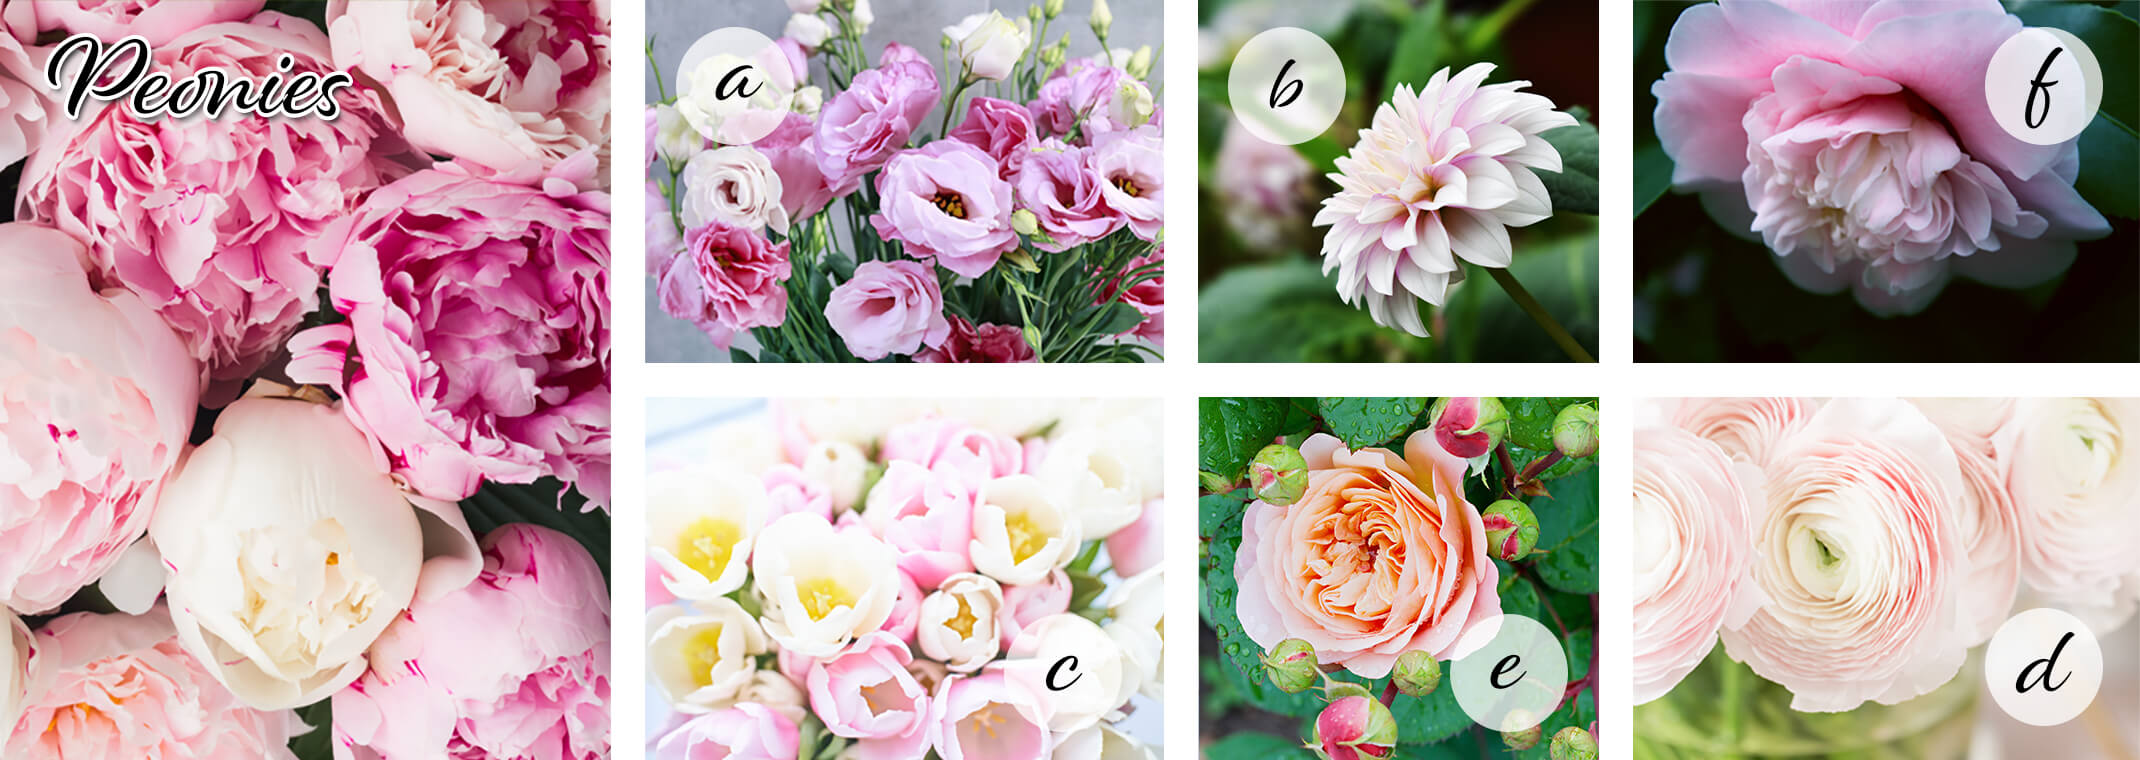 7 images: peonies with the text 'peonies' on the photo; Lisianthus (with a white circle and an 'a' on it), Flowering Tulips (with a white circle and a 'c' on it), Dahlias (with a white circle with a 'b' on it), Roses (with a white circle with an 'e' on it), Camellias (with a white circle and an 'f' on it); and Ranunculus (with a white circle and a 'd' on it).